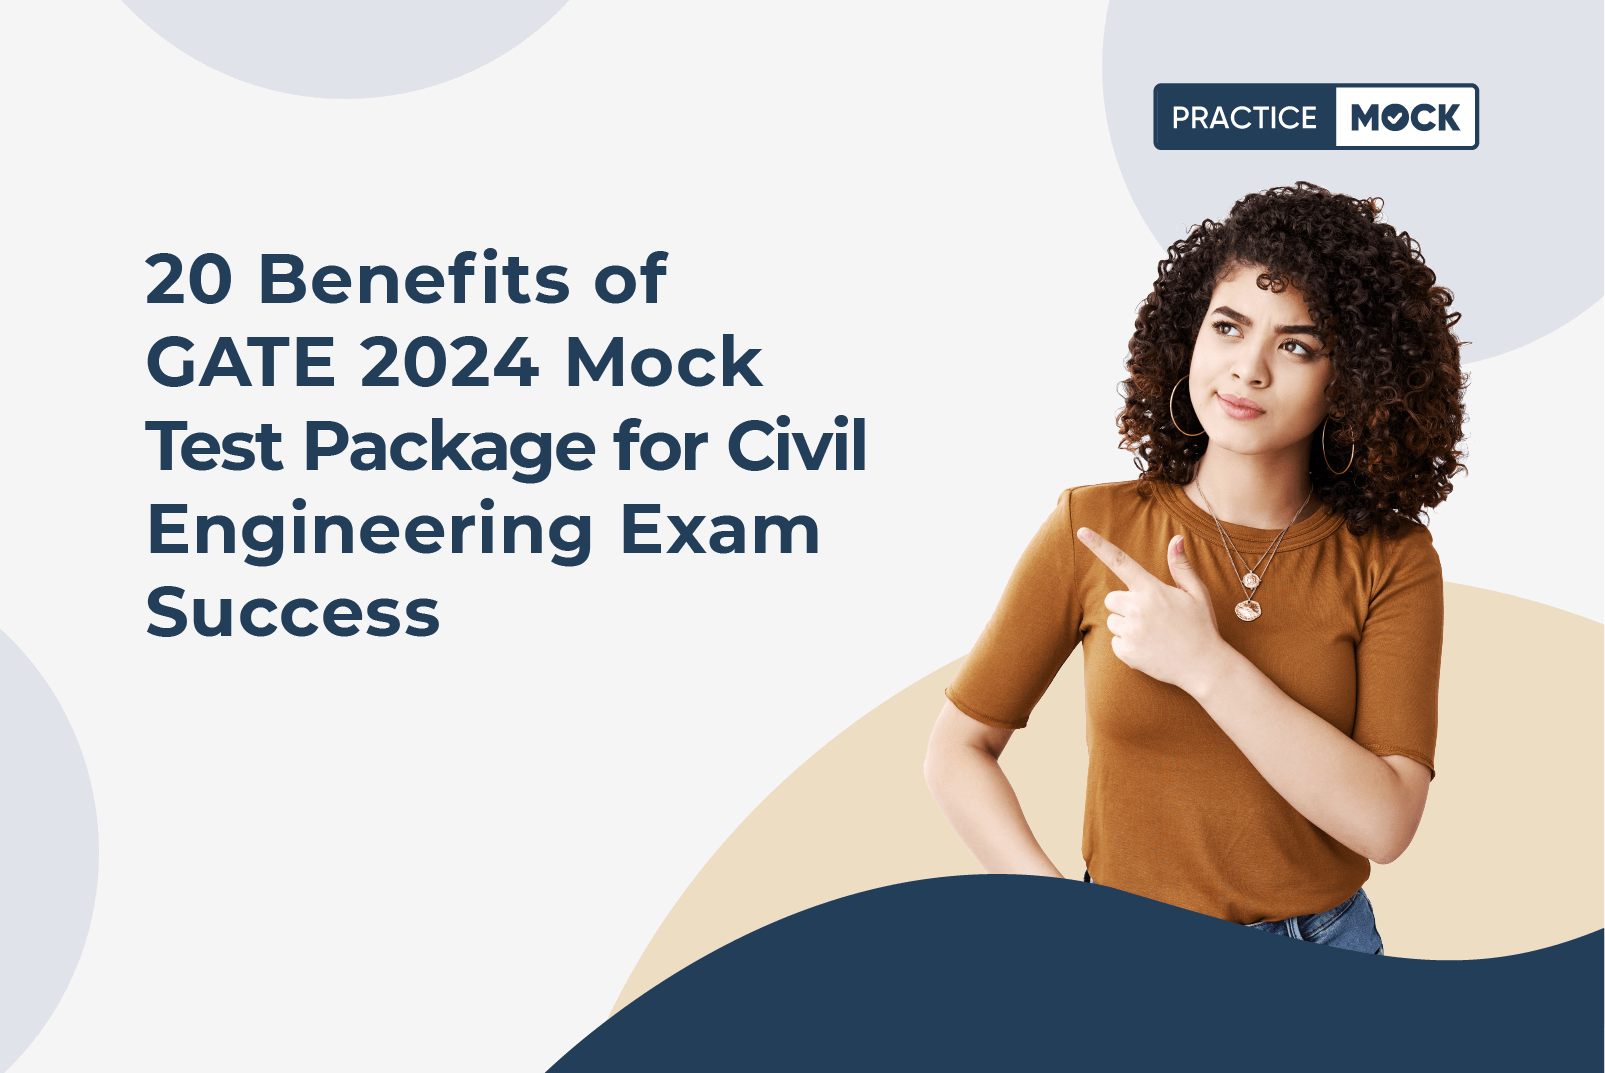 20 Benefits of GATE 2024 Civil Engineering Mock Test Package for Exam Triumph